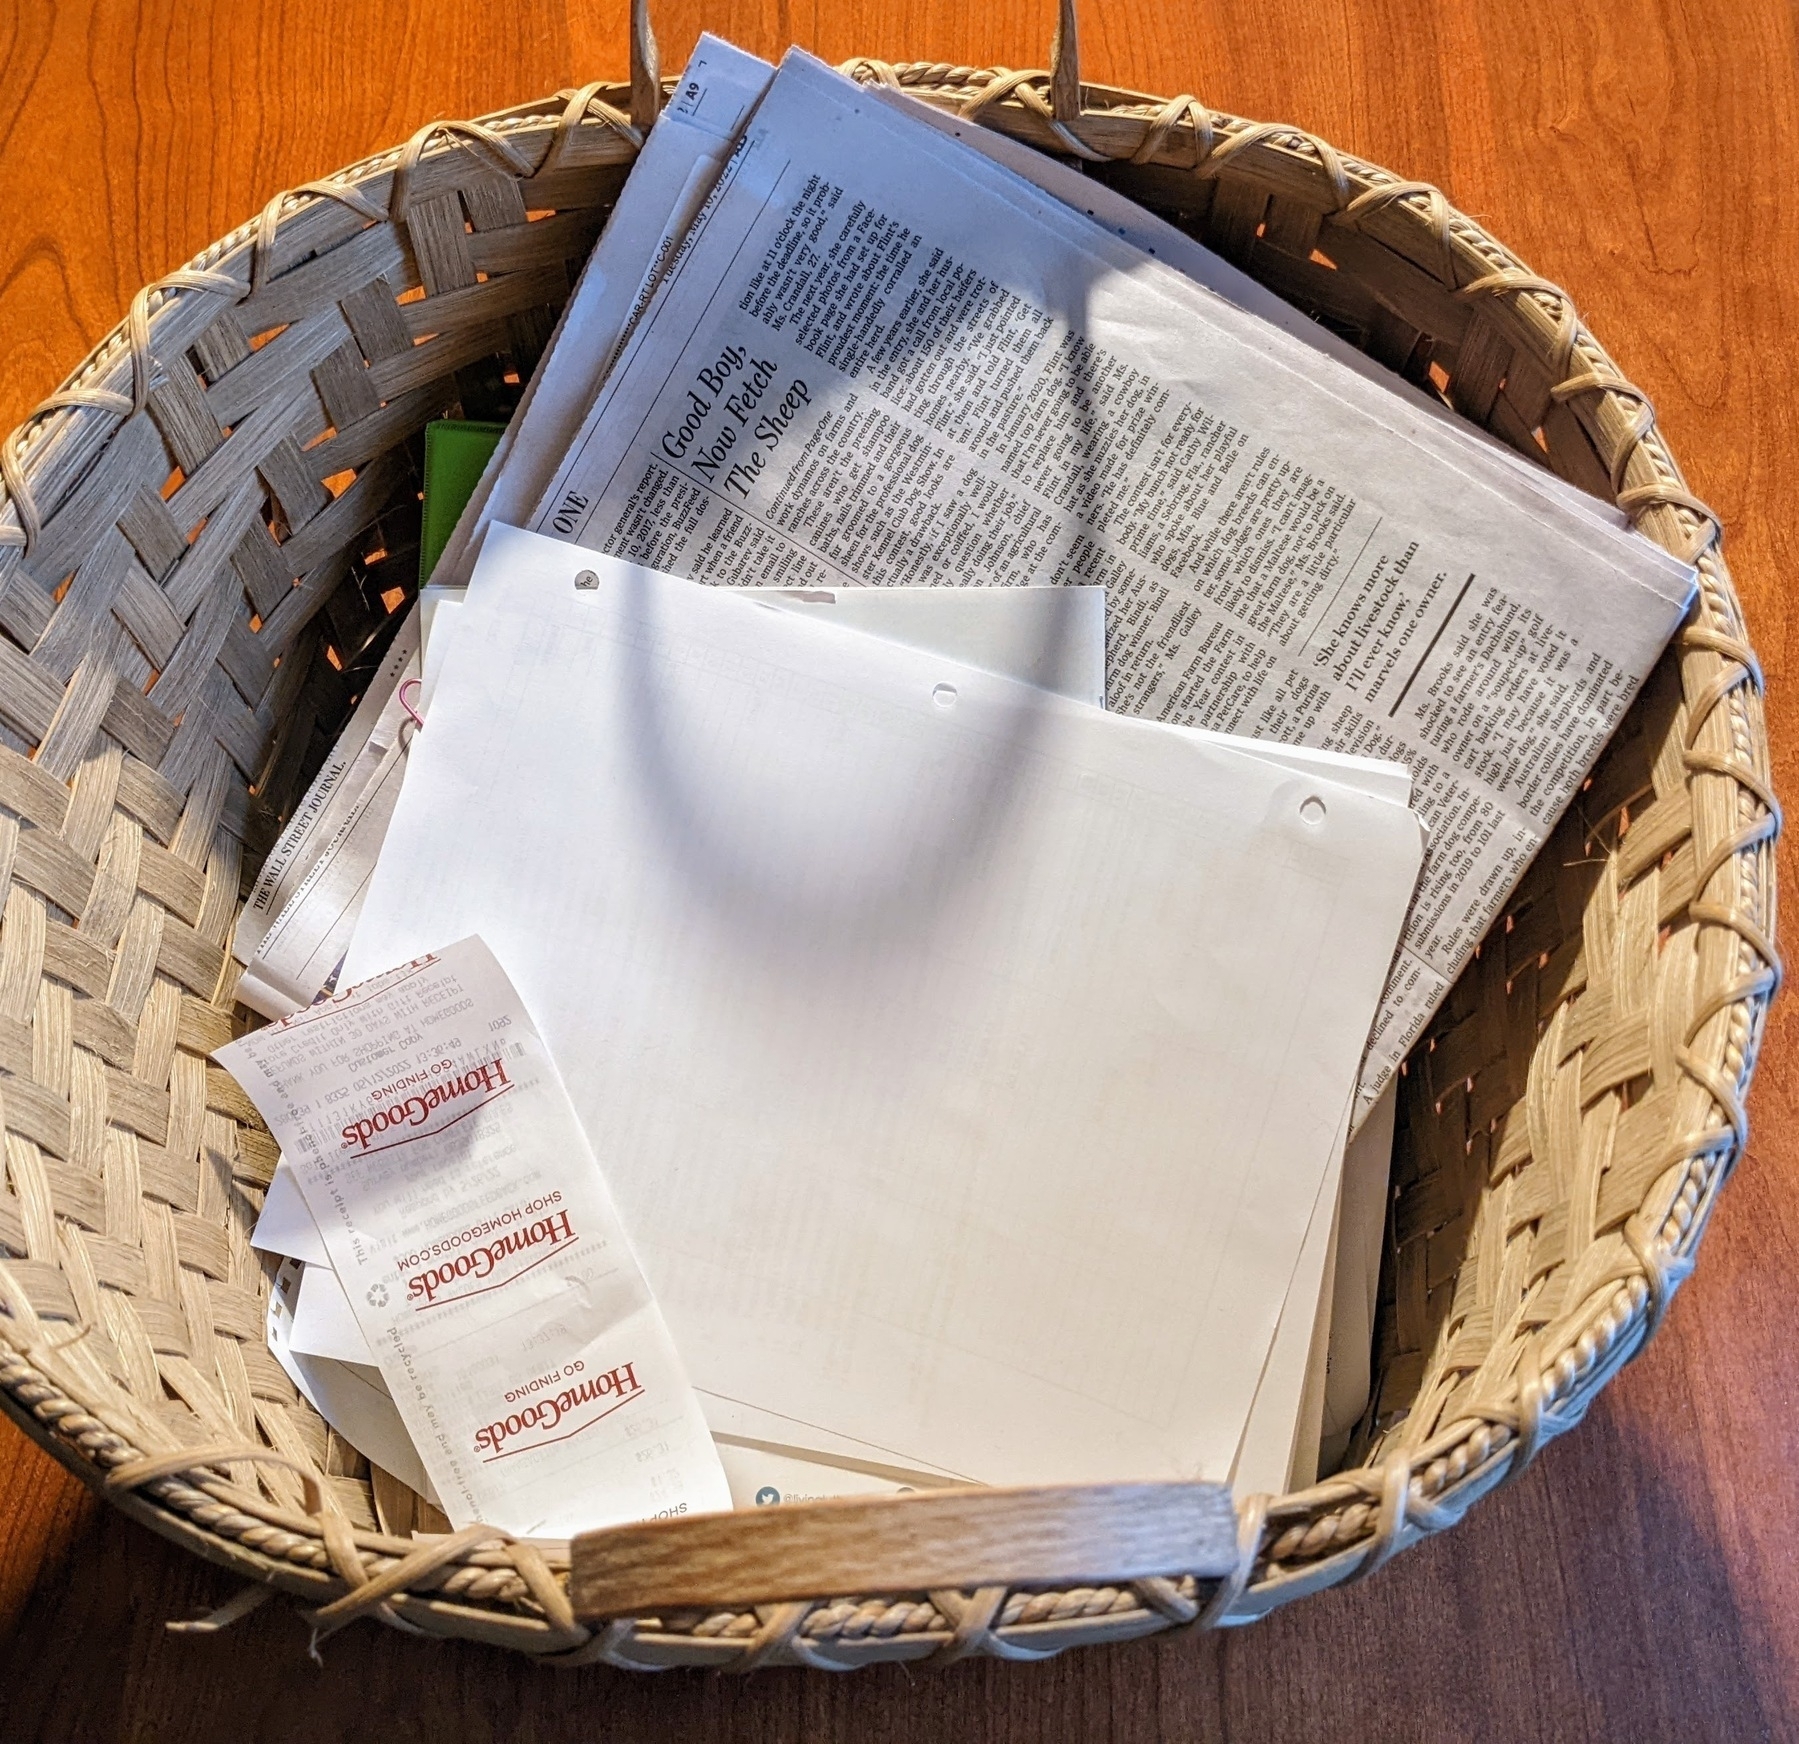 wooden basket containing a pile of paper, including a receipt, a handout, and a newspaper section